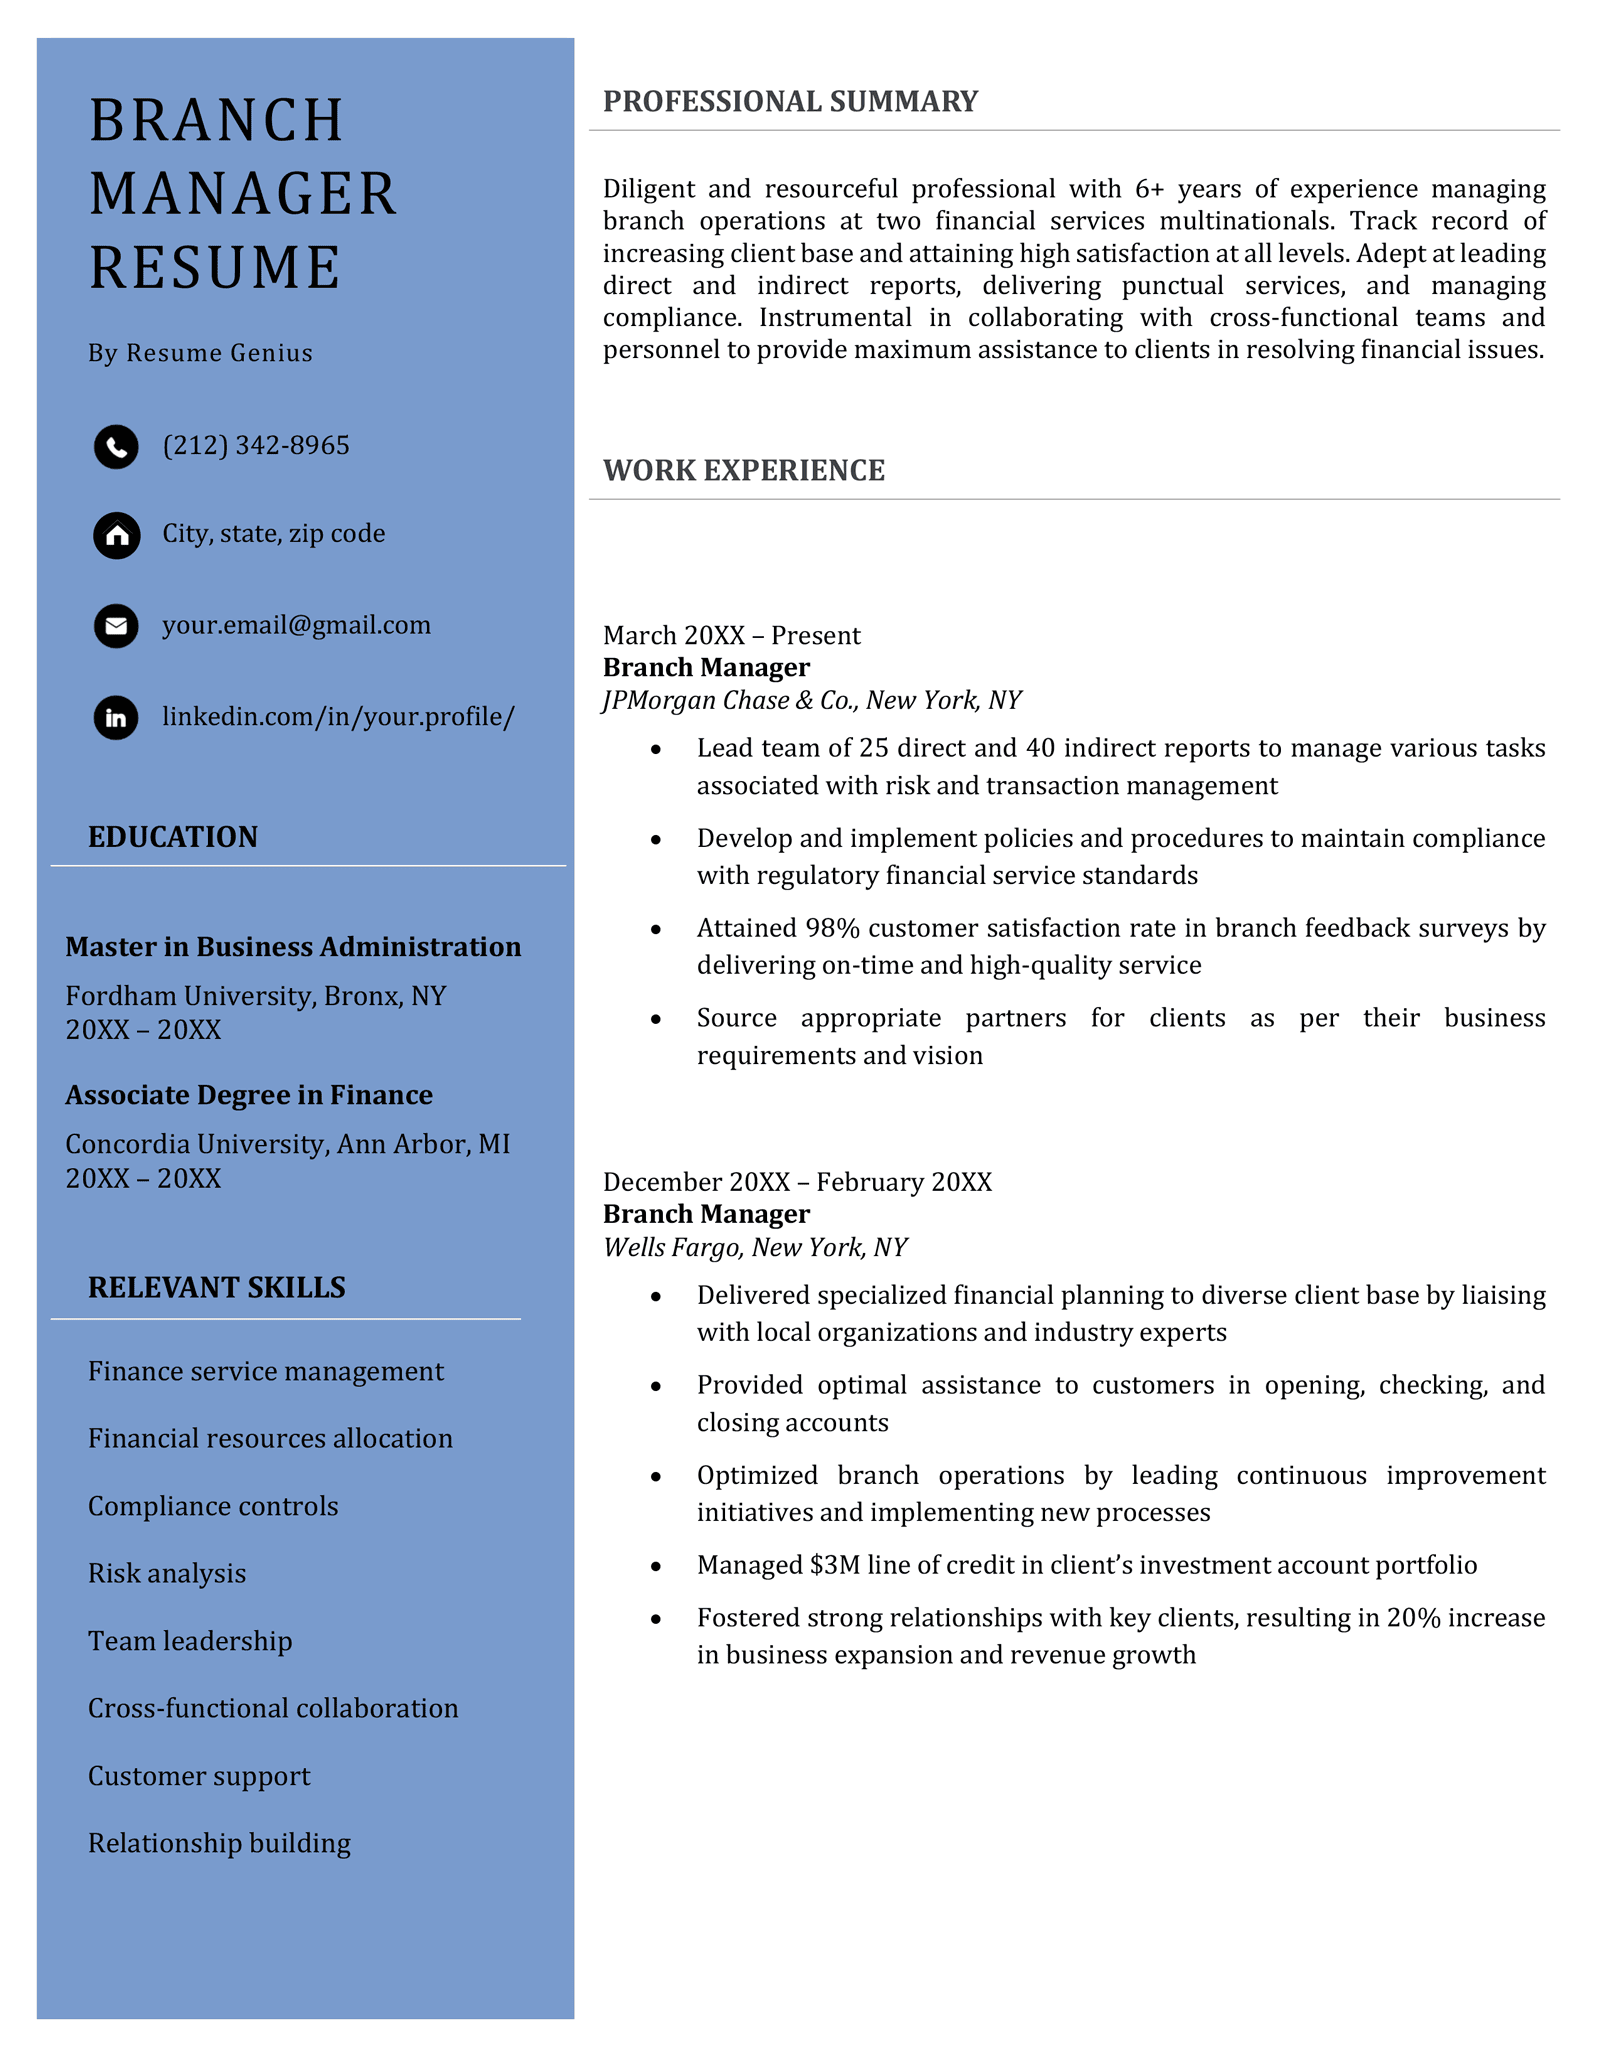 A branch manager resume with a blue left column highlighting the applicant's professional title, contact information, education, and relevant skills